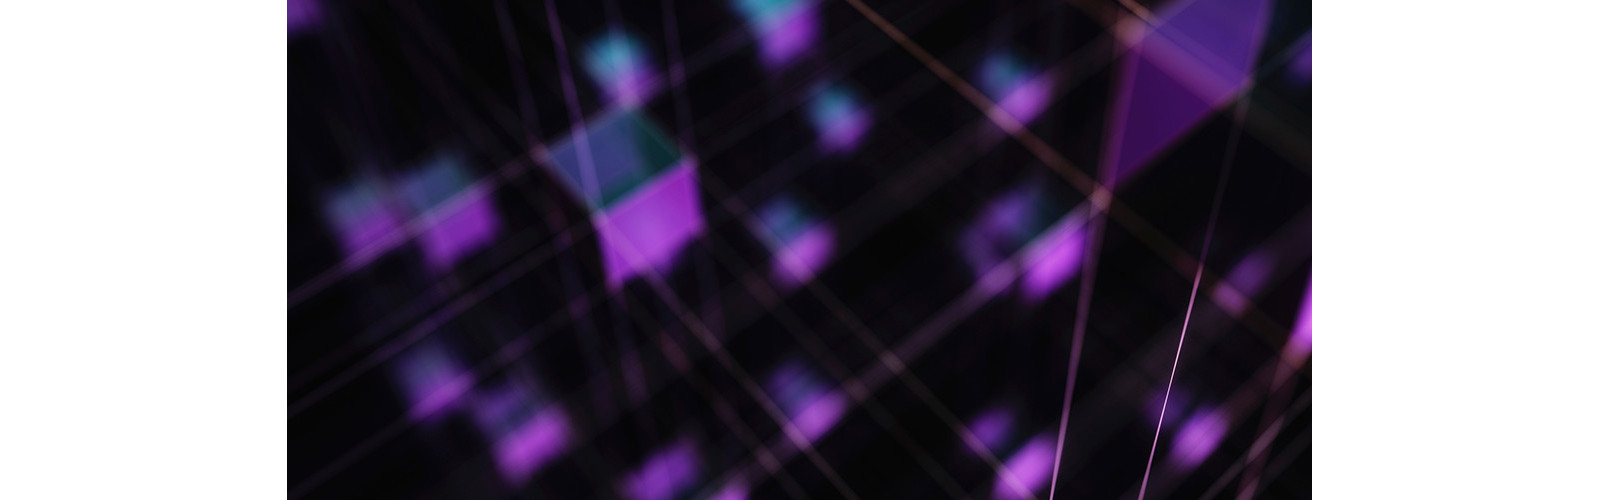 An abstract design of purple and blue cubes floating in the air